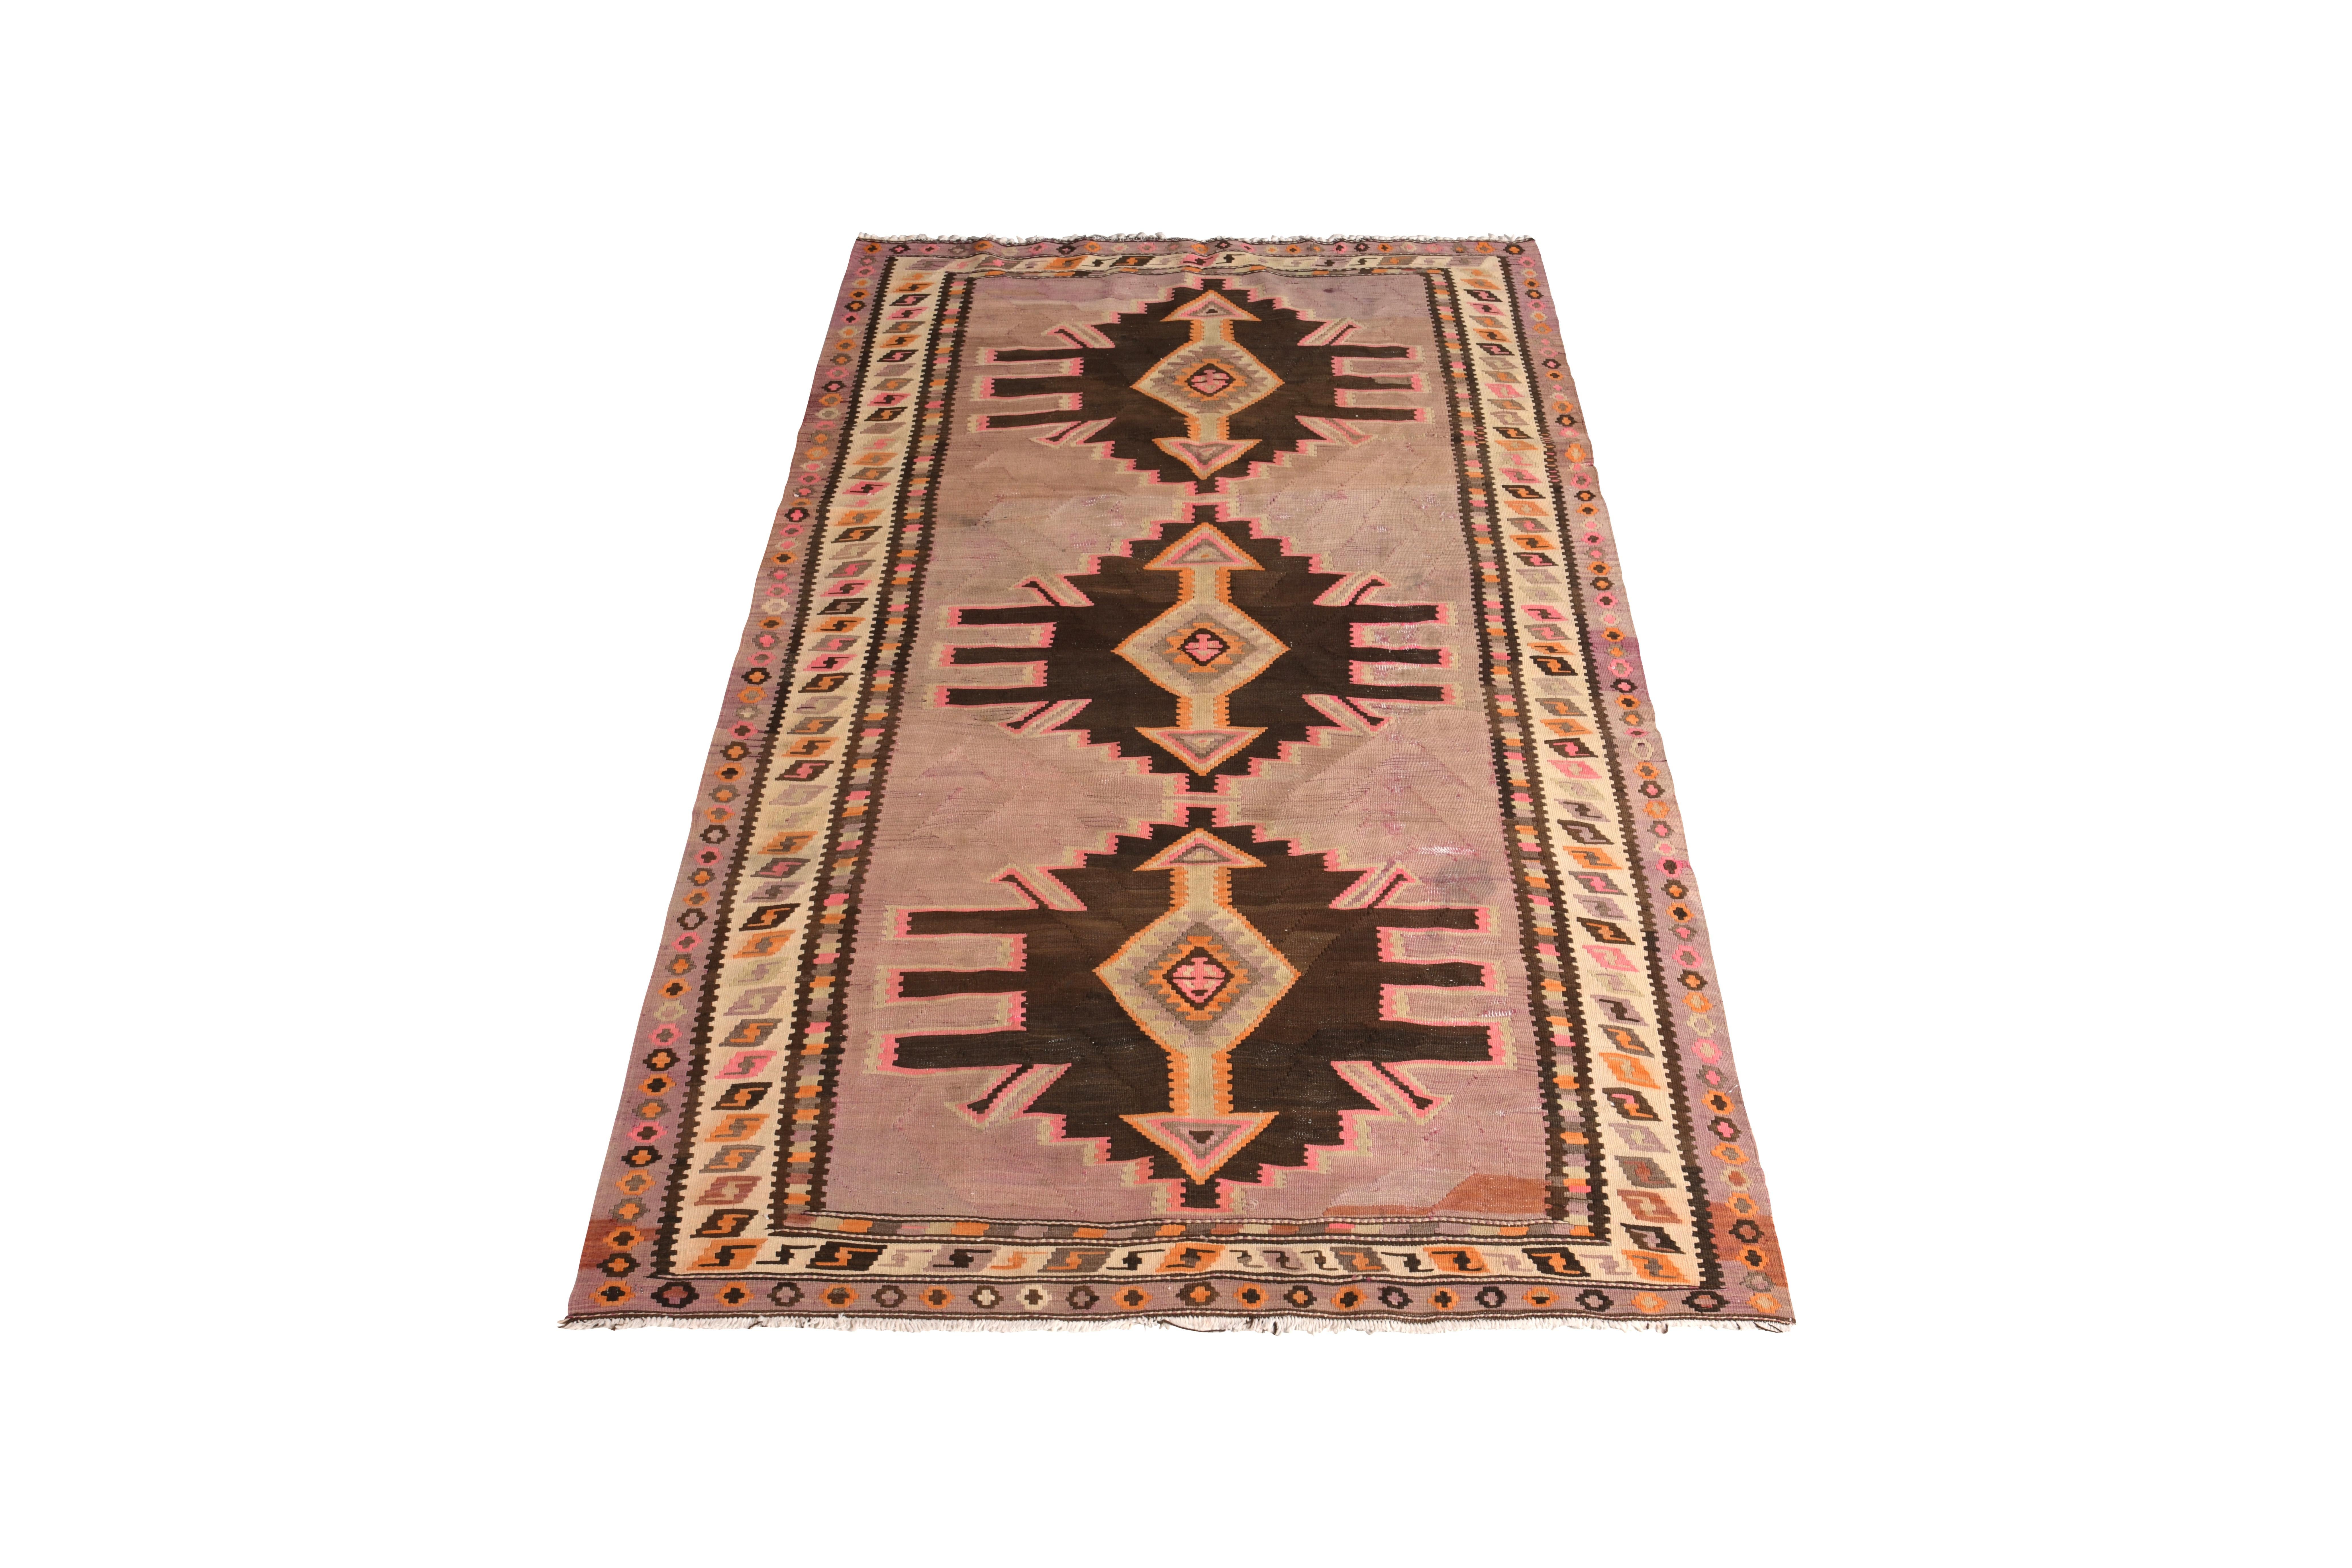 Handmade in flat-woven wool circa 1950-1960, this vintage rug is a midcentury Persian Kilim enjoys both a rare color and arresting sense of depth employed in the juxtaposition of the rich brown with that latter lavender purple colorway. Beyond this